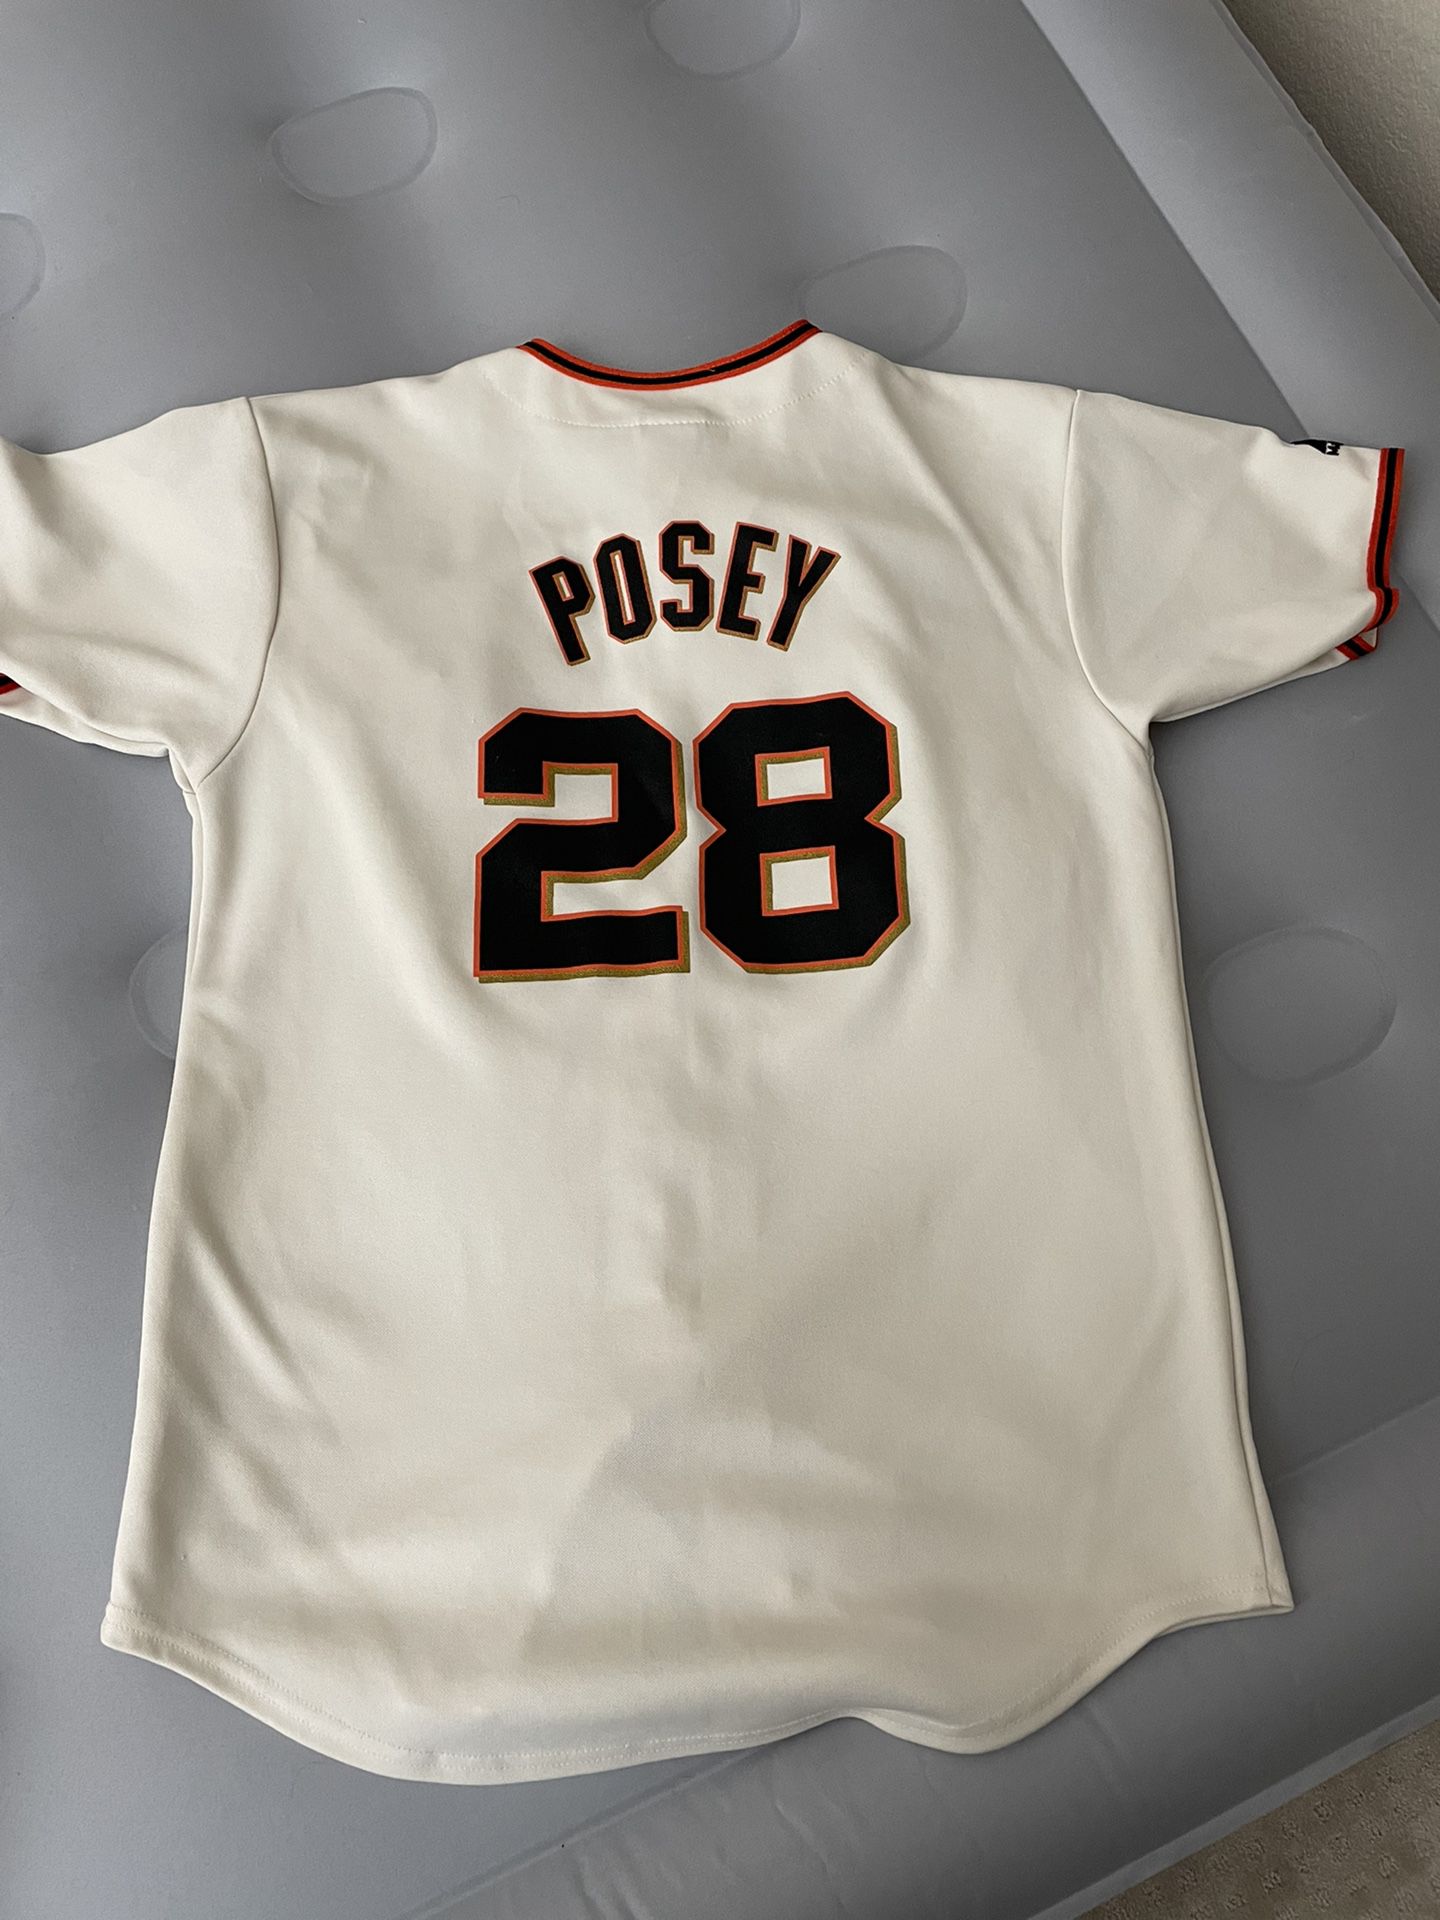 Nike MLB Jersey Buster Posey Youth XL for Sale in Fresno, CA - OfferUp